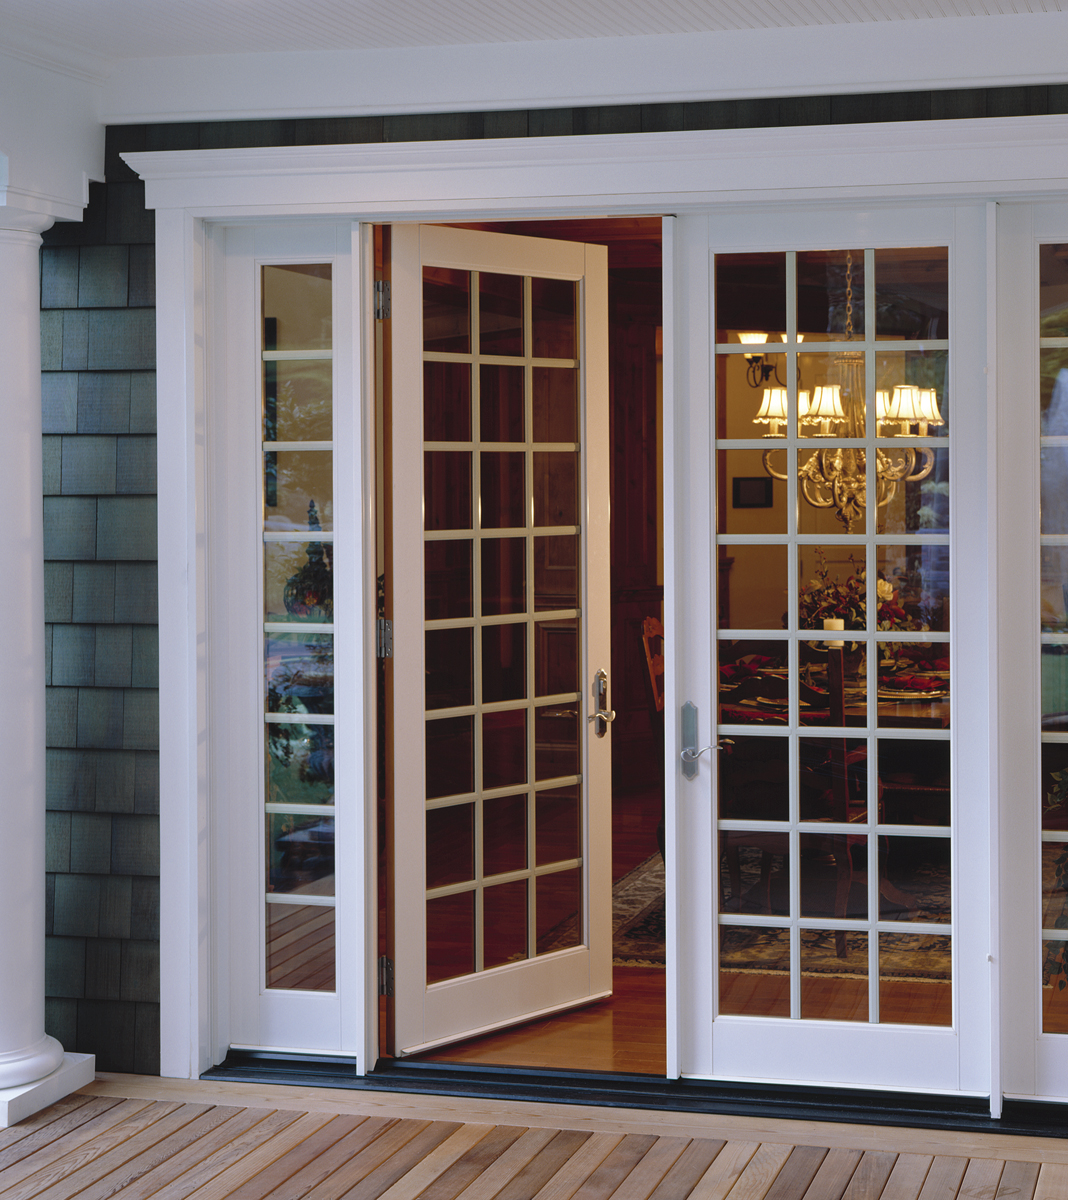 Can You Replace A Sliding Glass Door With French Doors Milgard Blog Milgard In 2020 Painted Exterior Doors French Doors Interior French Doors